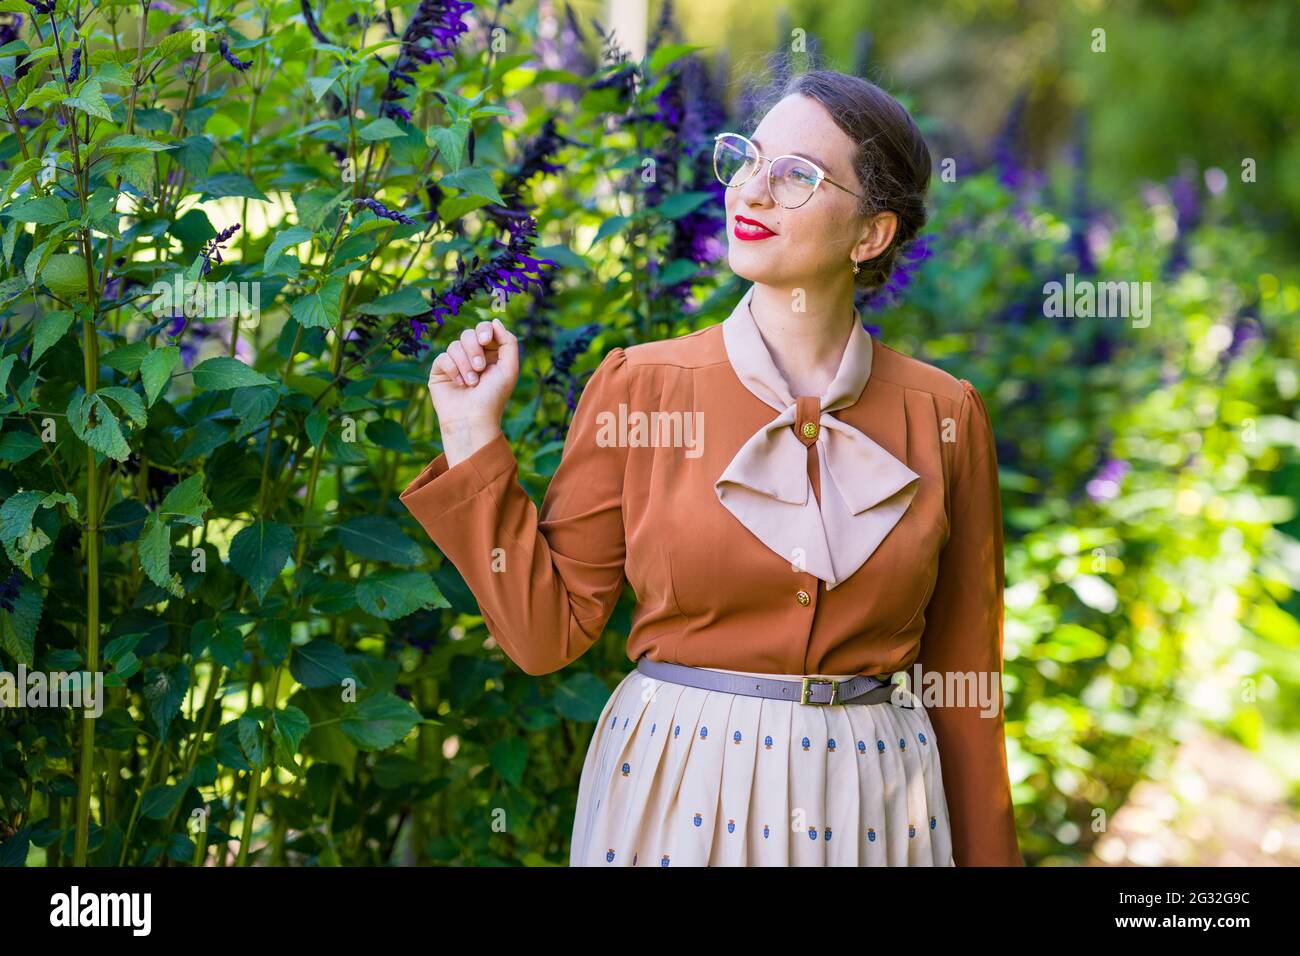 Young Intellectual Woman Dressed in 1940s Clothing In a Garden Stock Photo